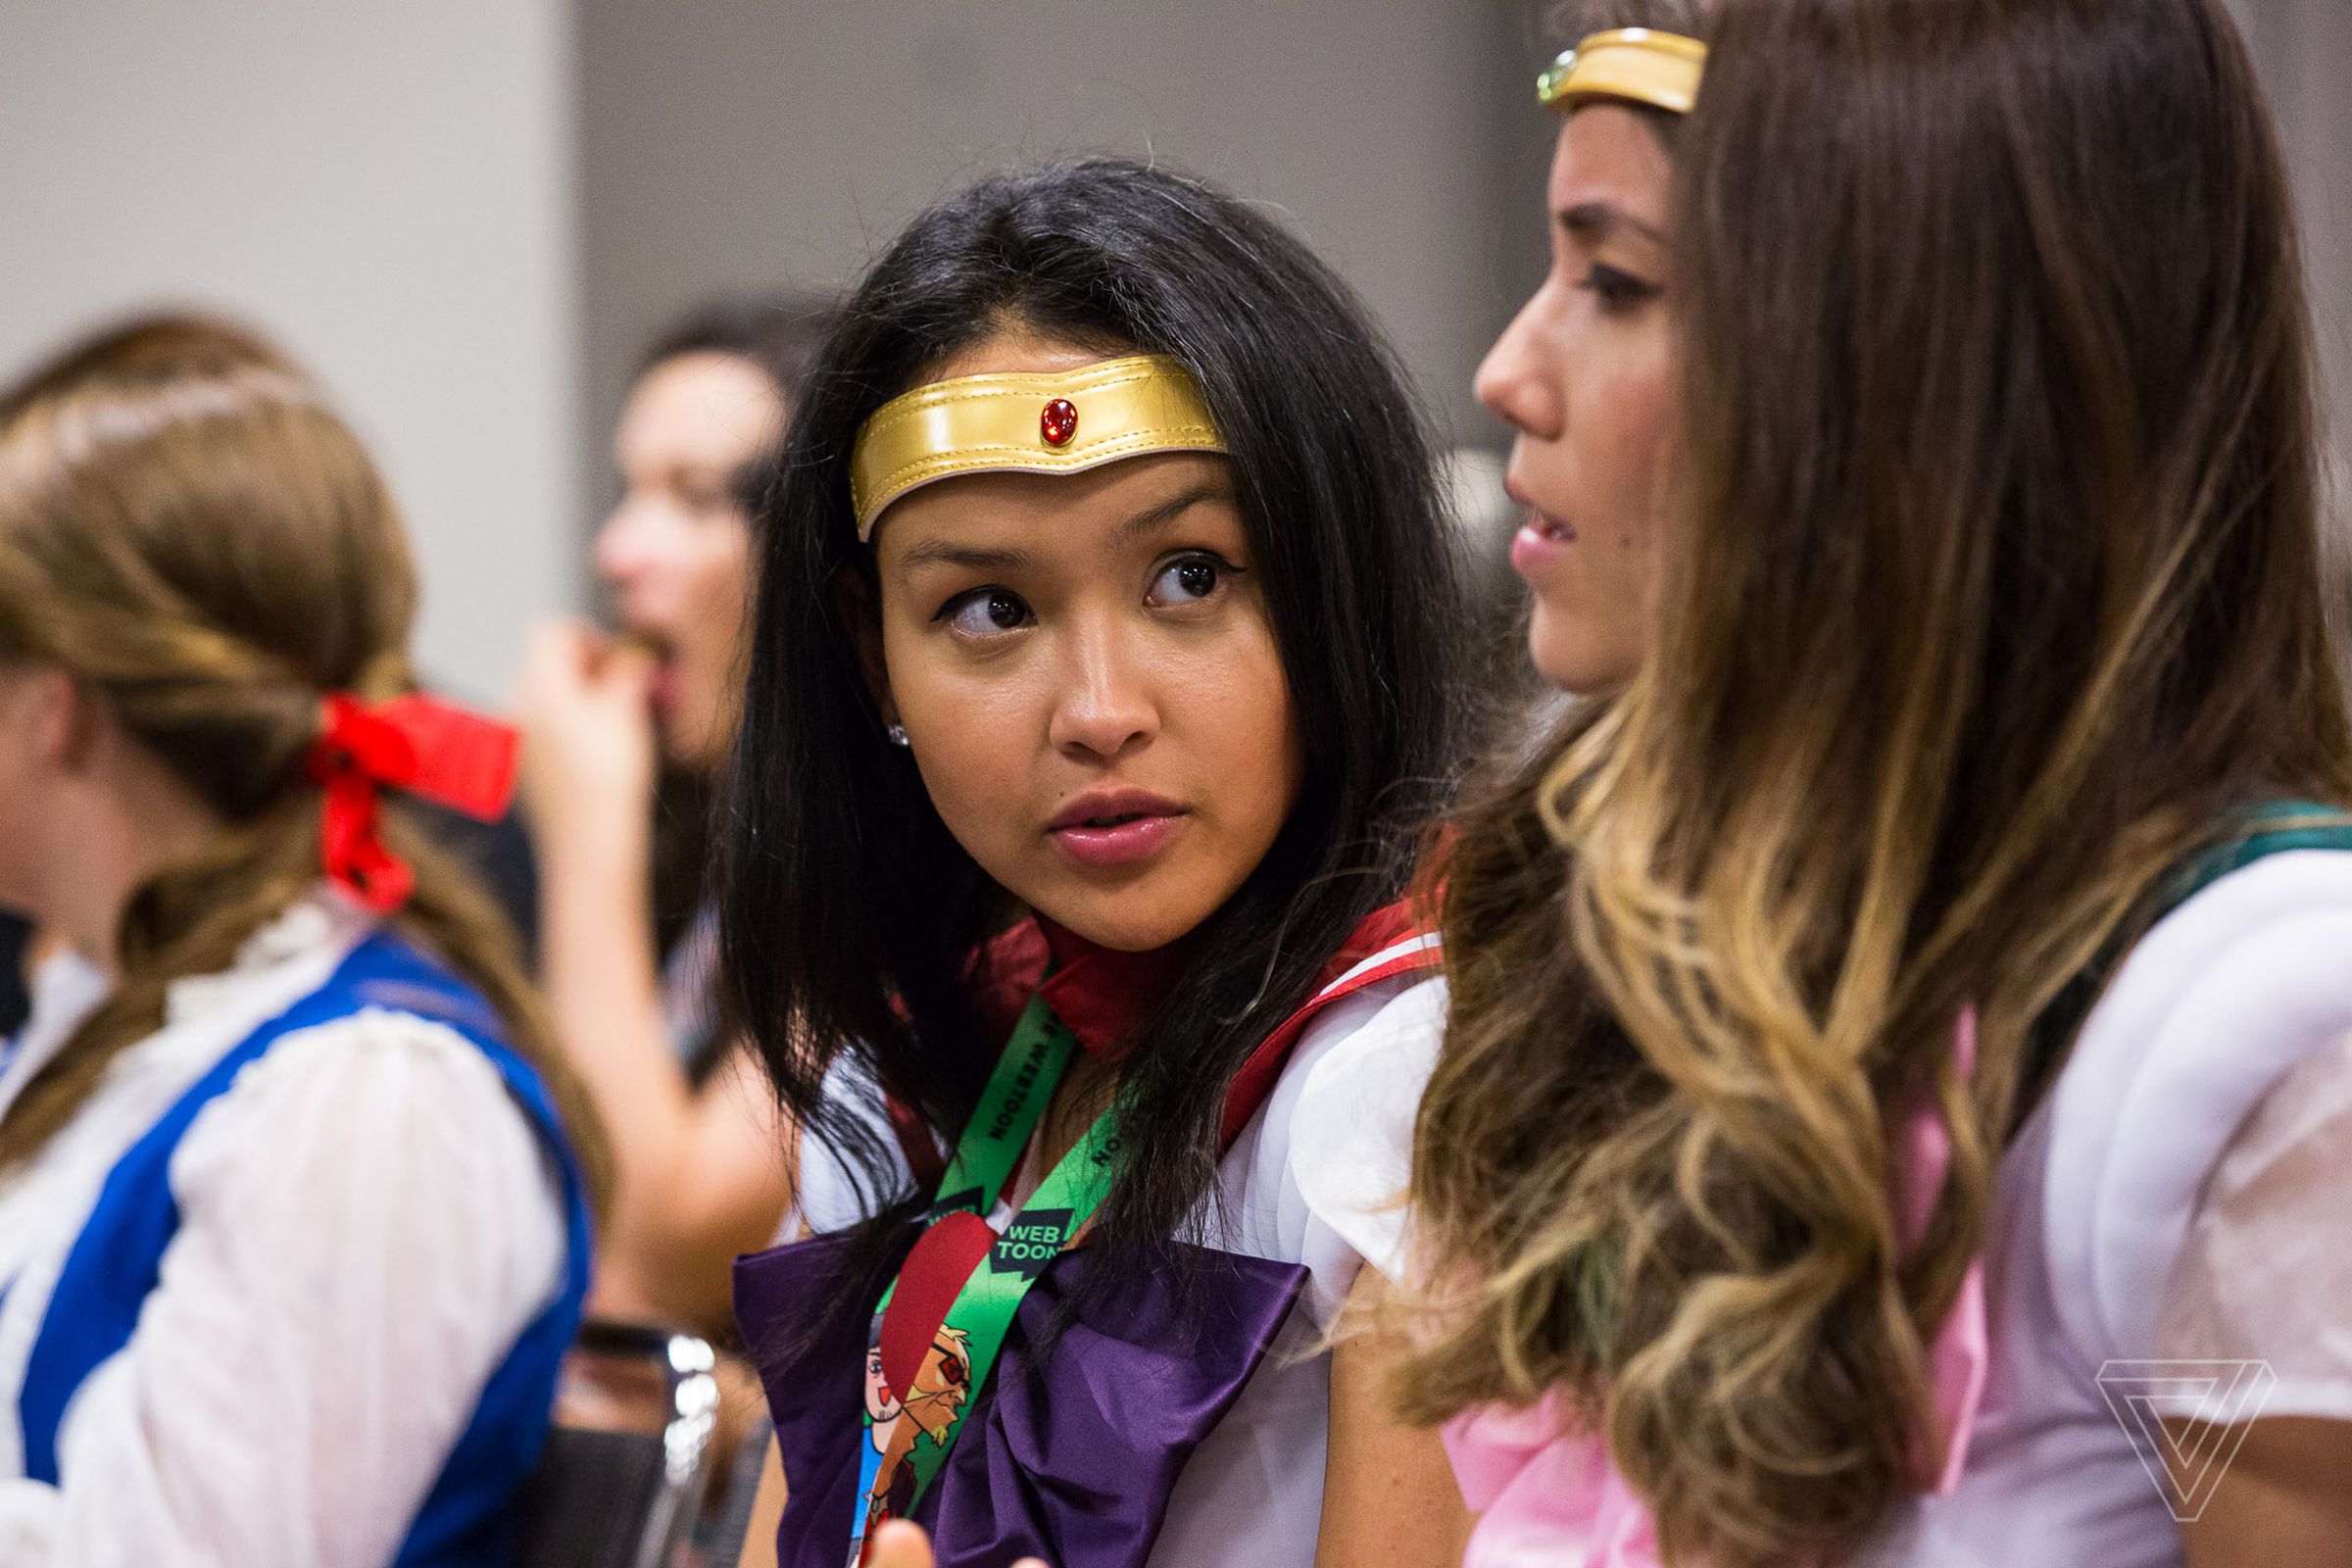 Audience members dressed in cosplay as members of the Sailor Moon franchise at the Women of Color Break Out the Books panel at the New York Comic Con 2017.